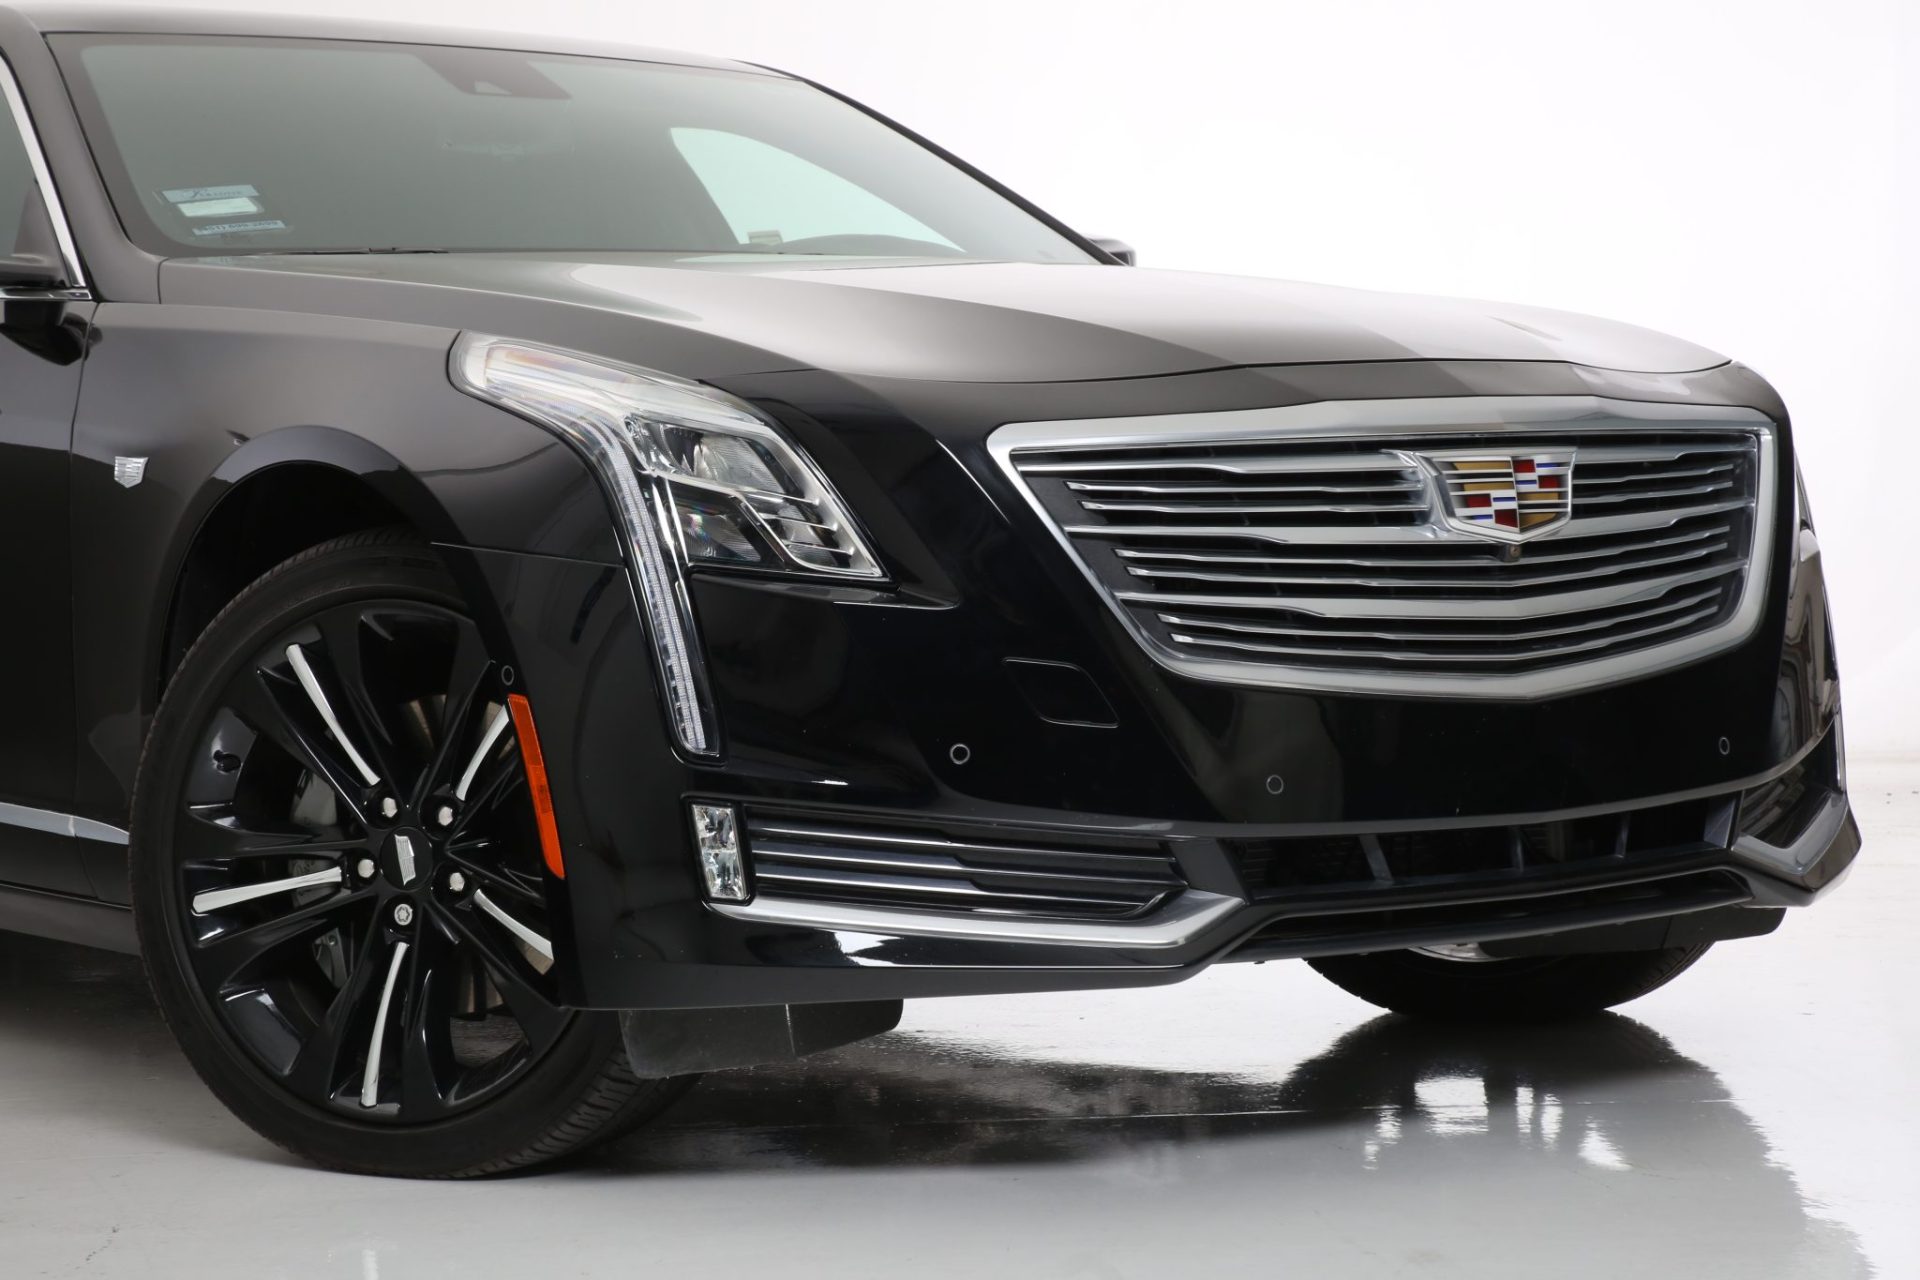 Cadillac CT6-V Stretched Limousine - Exterior Photo #2